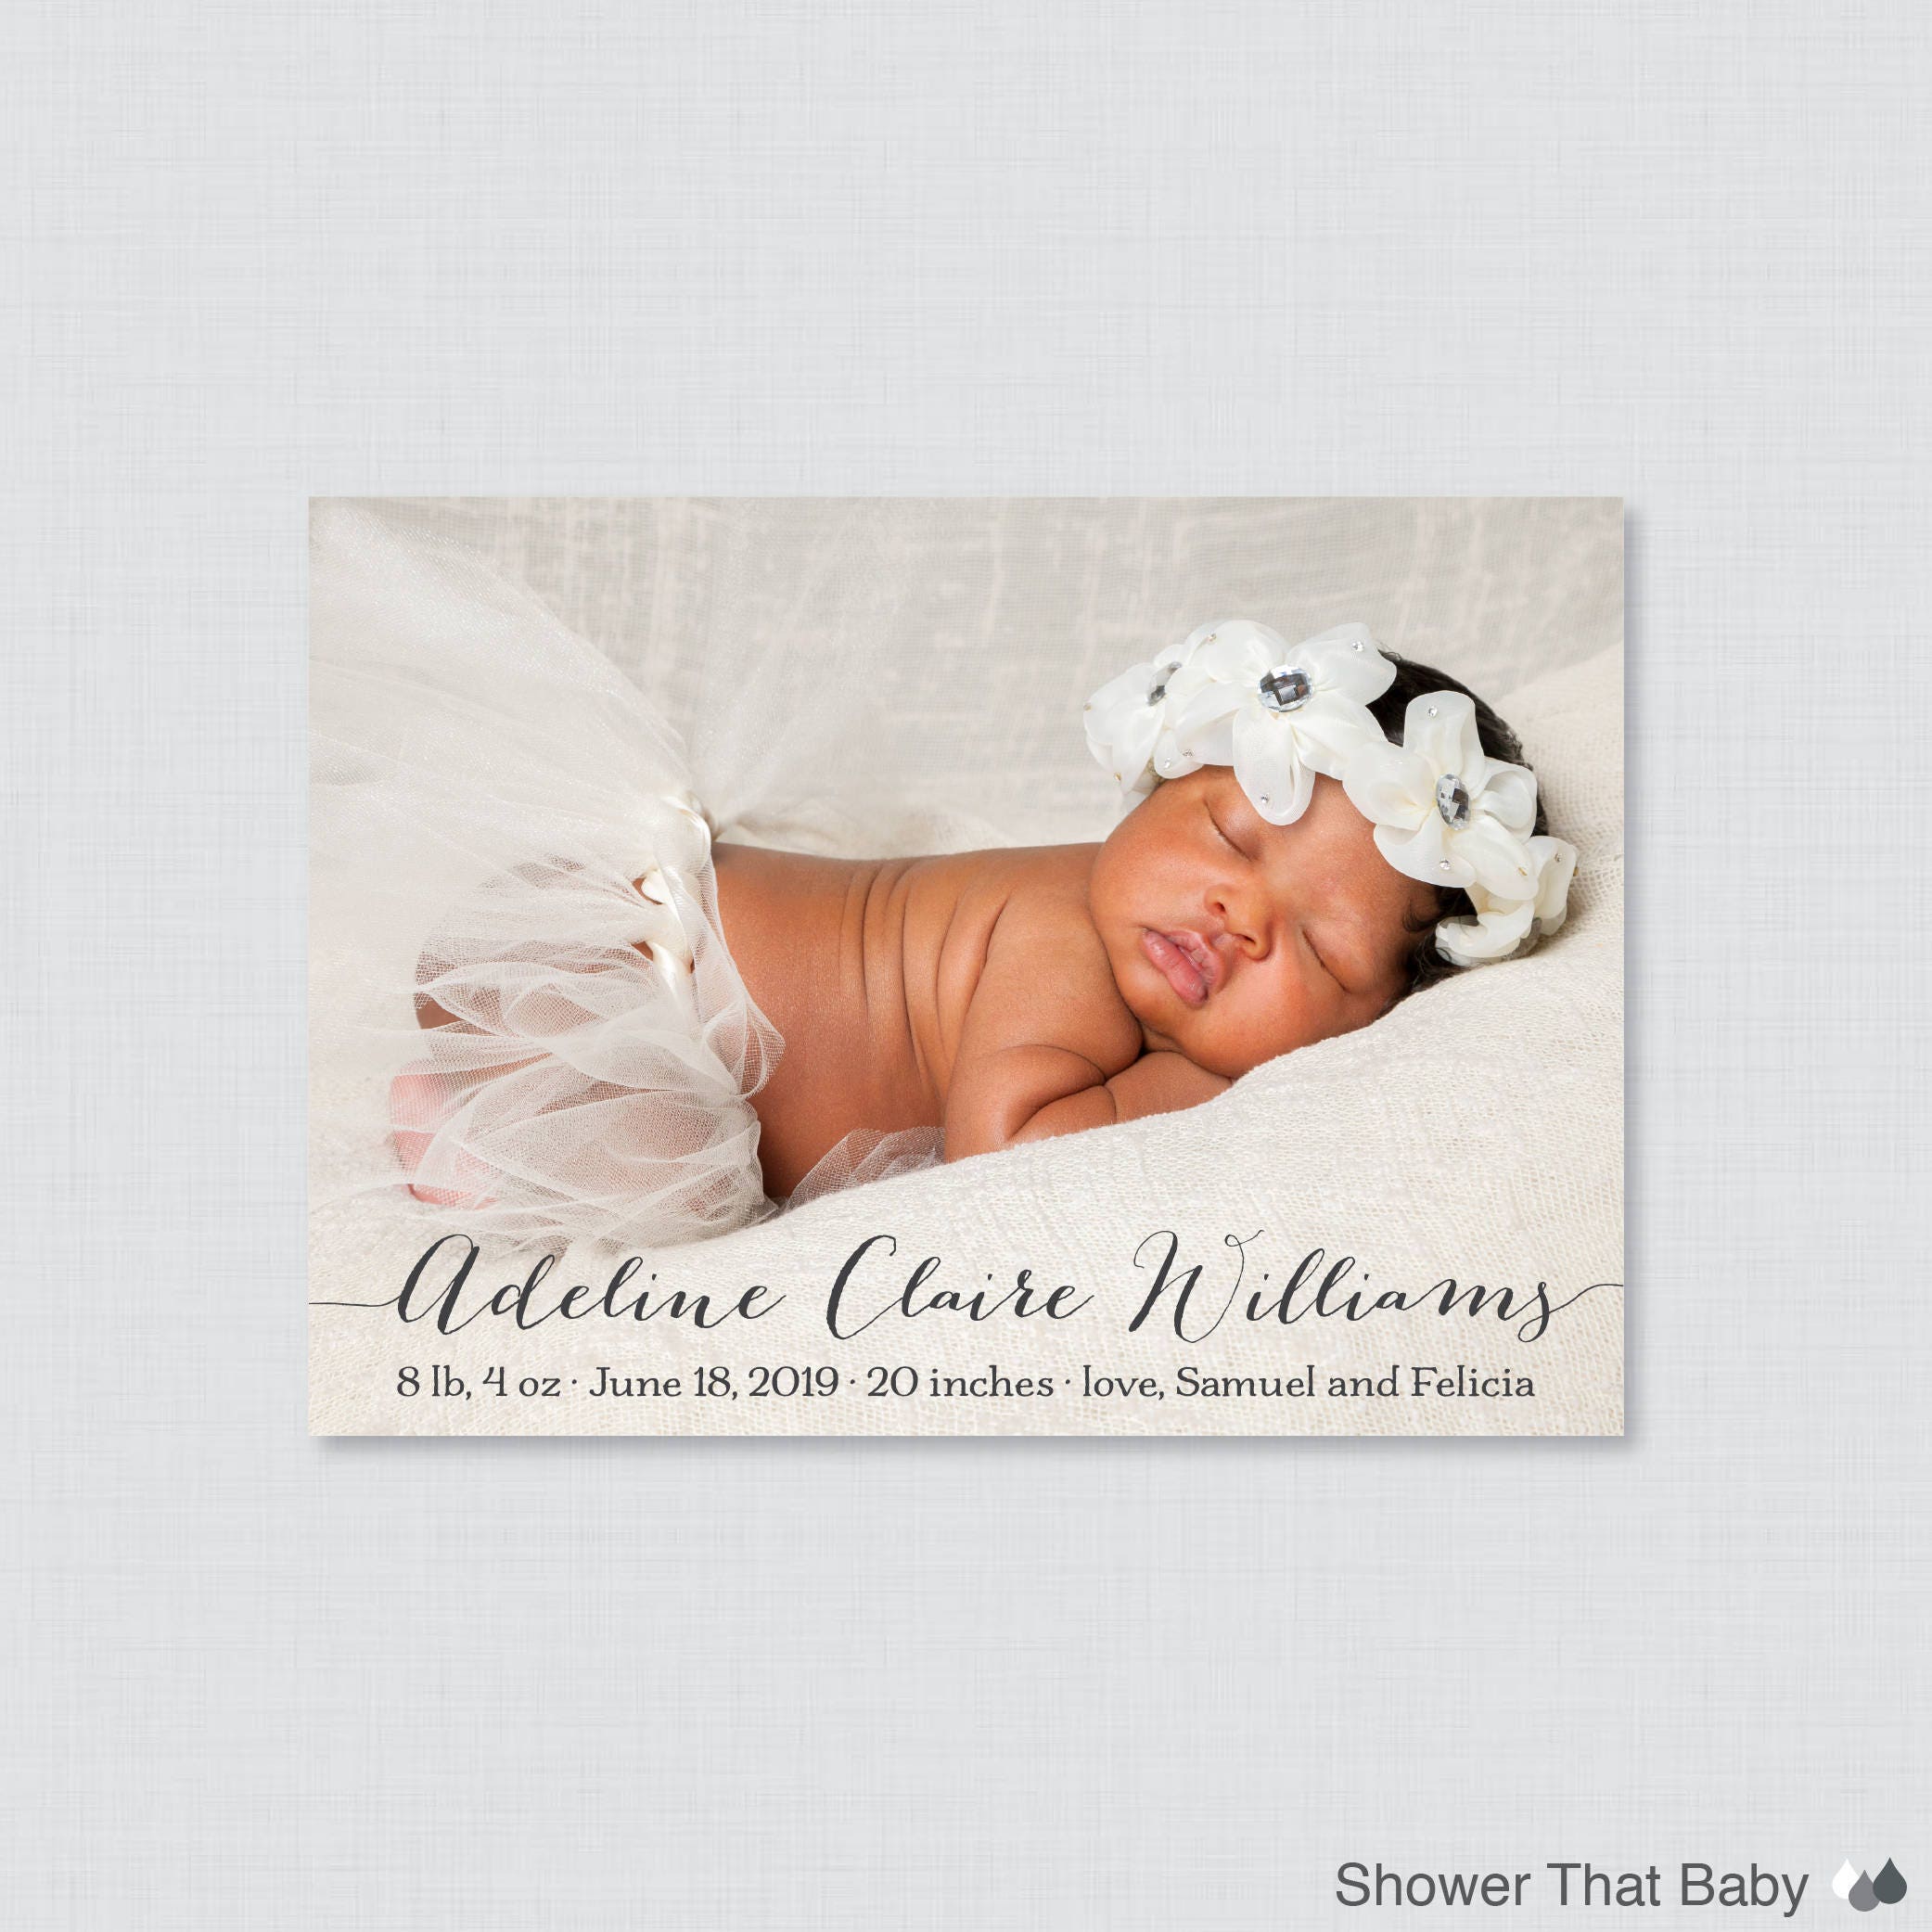 Printable Or Printed Photo Birth Announcement Cards With Name in Script, Elegant Announcement, Horizontal/Landscape Ba12